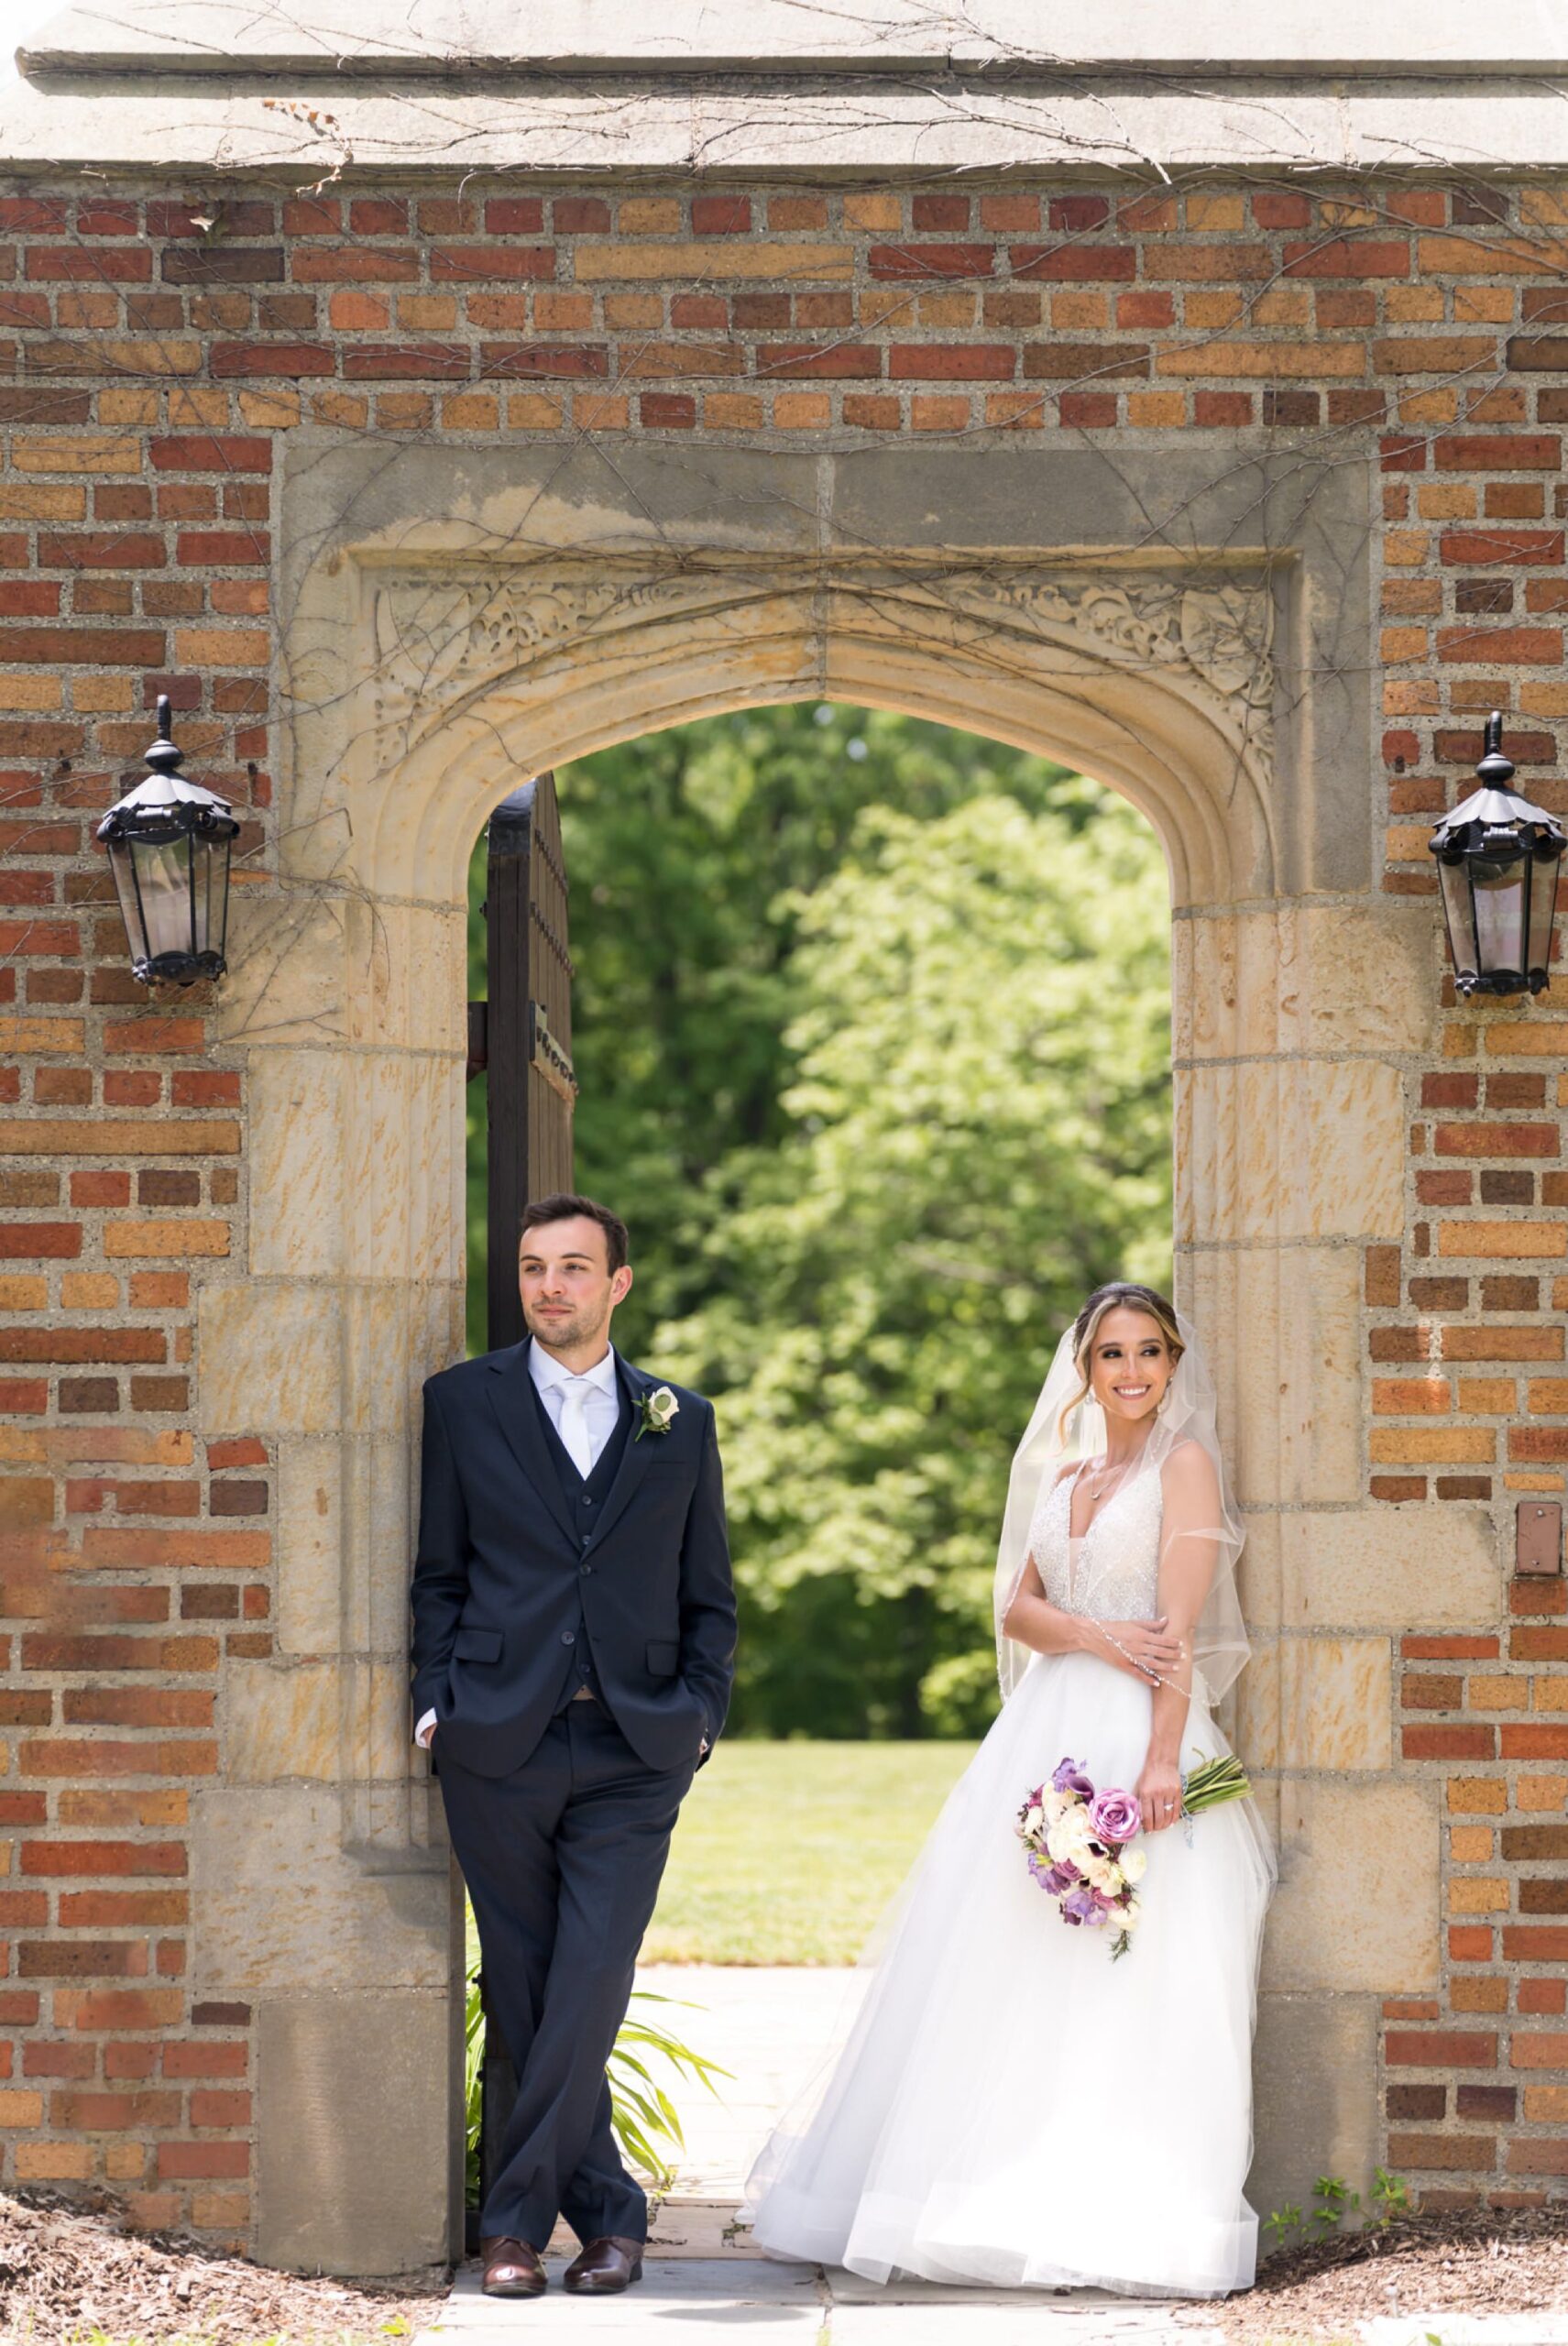 A bride and groom pose in an archway at their wedding at Meadowbrook Hall.  